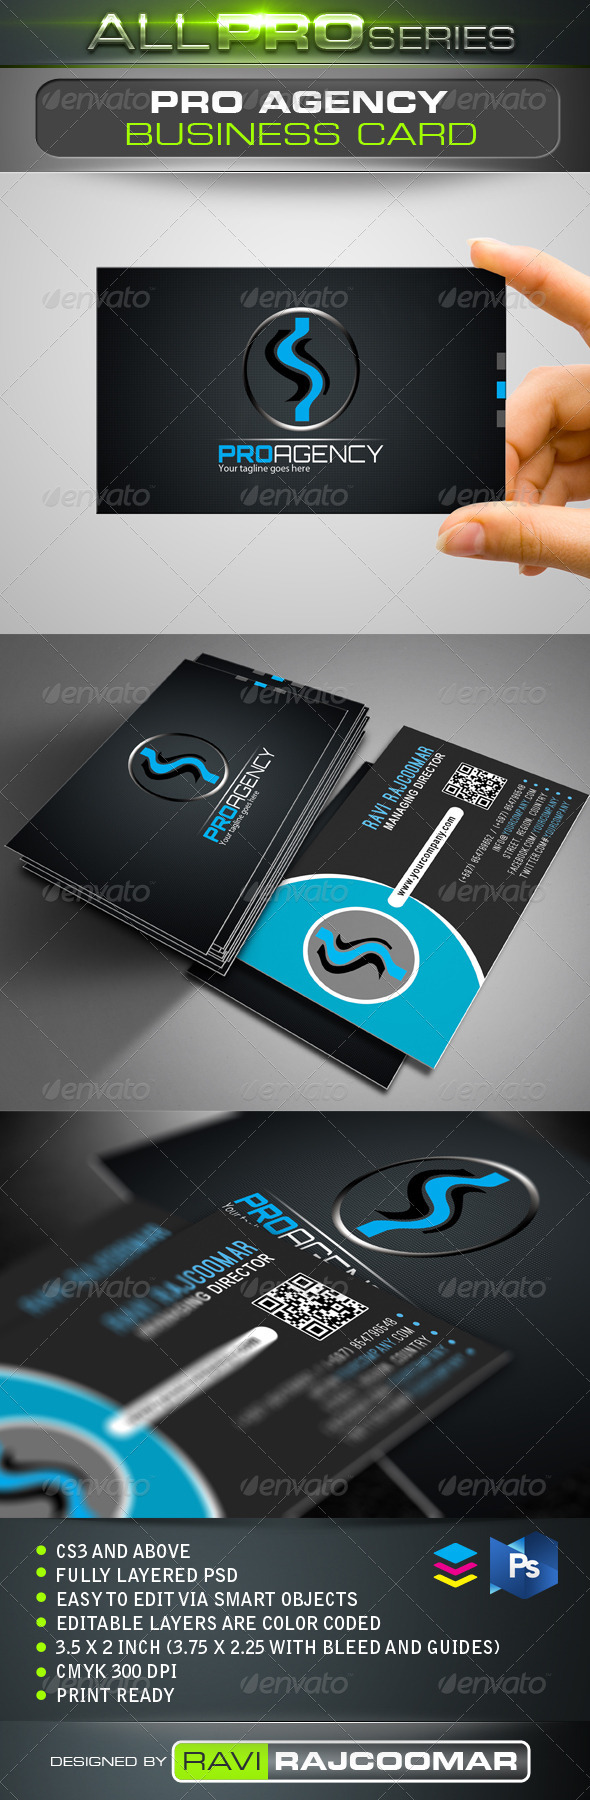 Pro Agency Business Card